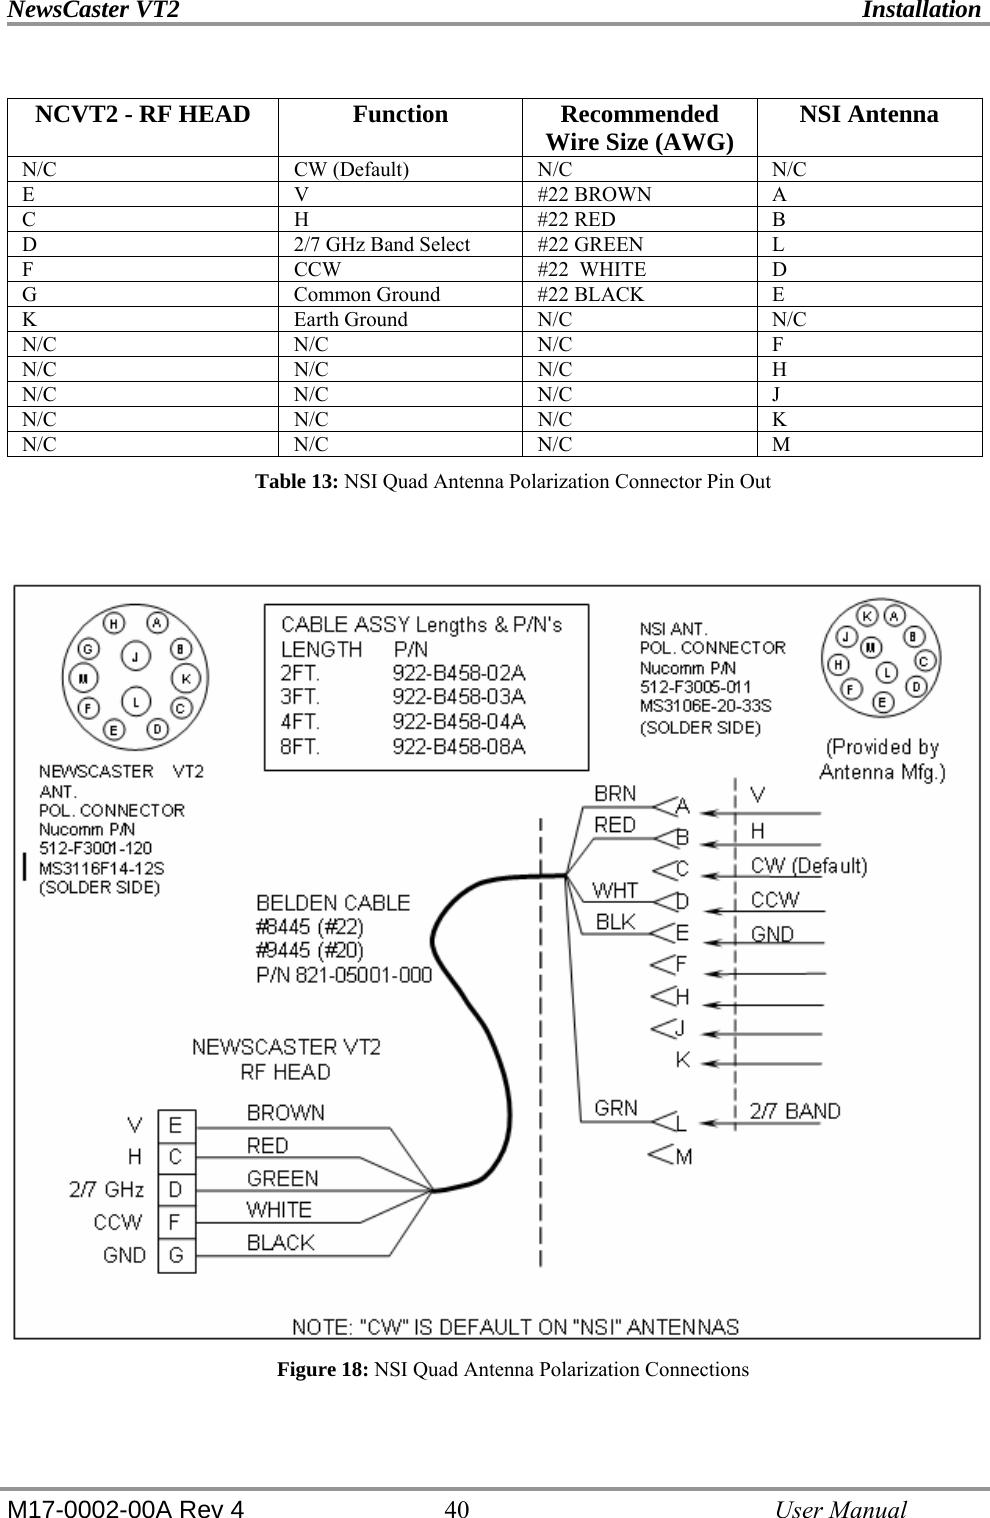 NewsCaster VT2    Installation  M17-0002-00A Rev 4 40   User Manual  NCVT2 - RF HEAD  Function  Recommended Wire Size (AWG)  NSI Antenna N/C CW (Default) N/C N/C E V #22 BROWN A C H #22 RED B D  2/7 GHz Band Select  #22 GREEN  L F  CCW  #22  WHITE  D G  Common Ground  #22 BLACK  E K Earth Ground N/C N/C N/C N/C N/C F N/C N/C N/C H N/C N/C N/C J N/C N/C N/C K N/C N/C N/C M Table 13: NSI Quad Antenna Polarization Connector Pin Out  Figure 18: NSI Quad Antenna Polarization Connections 